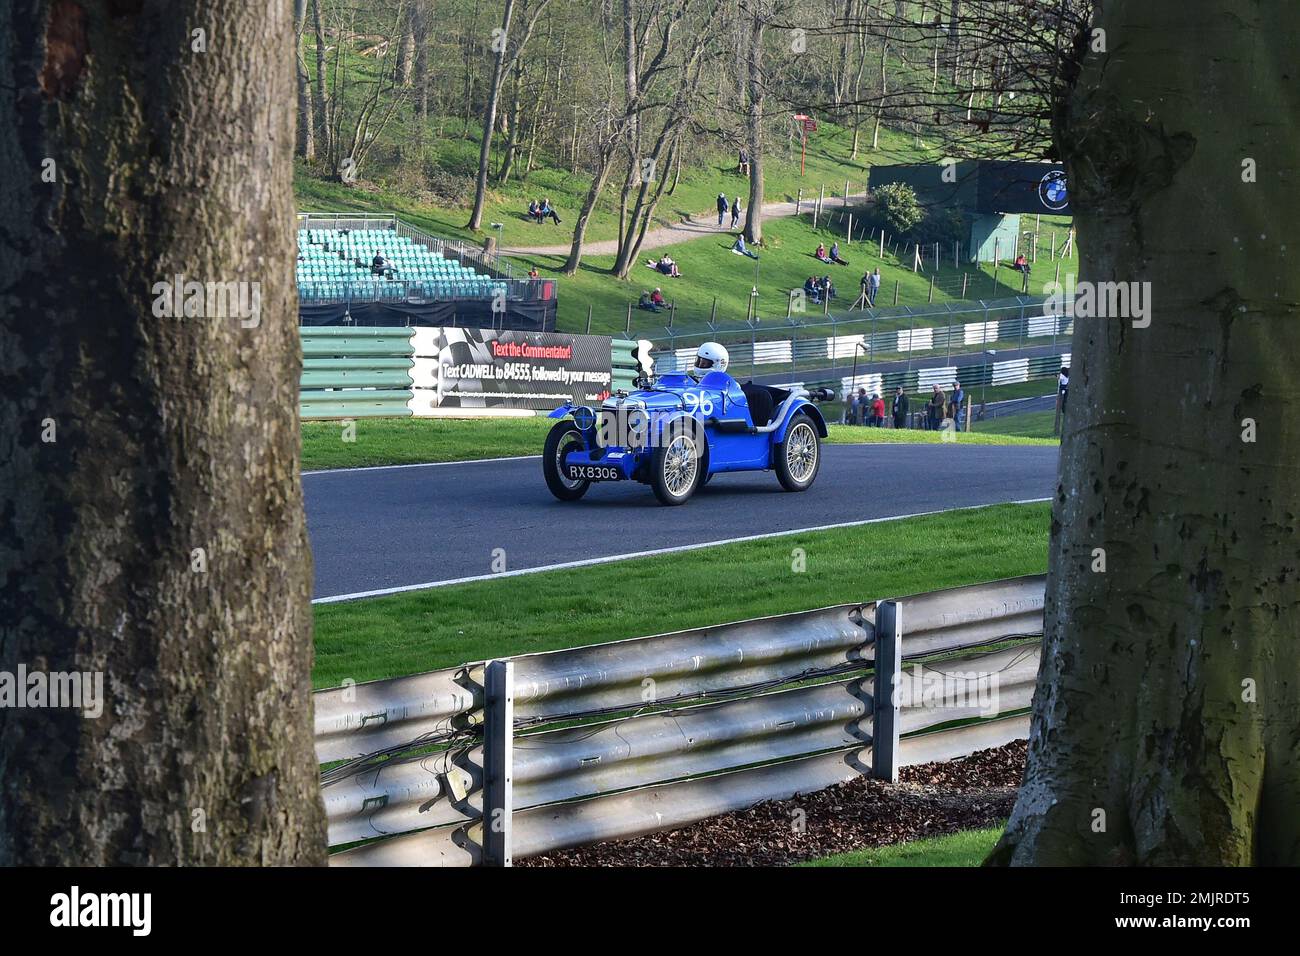 Chris Cadman, MG Montlhery, Between the trees, Triple M Register Race for Pre-War MG Cars, fifteen minutes of racing for iconic MG Midget, Magna and M Stock Photo